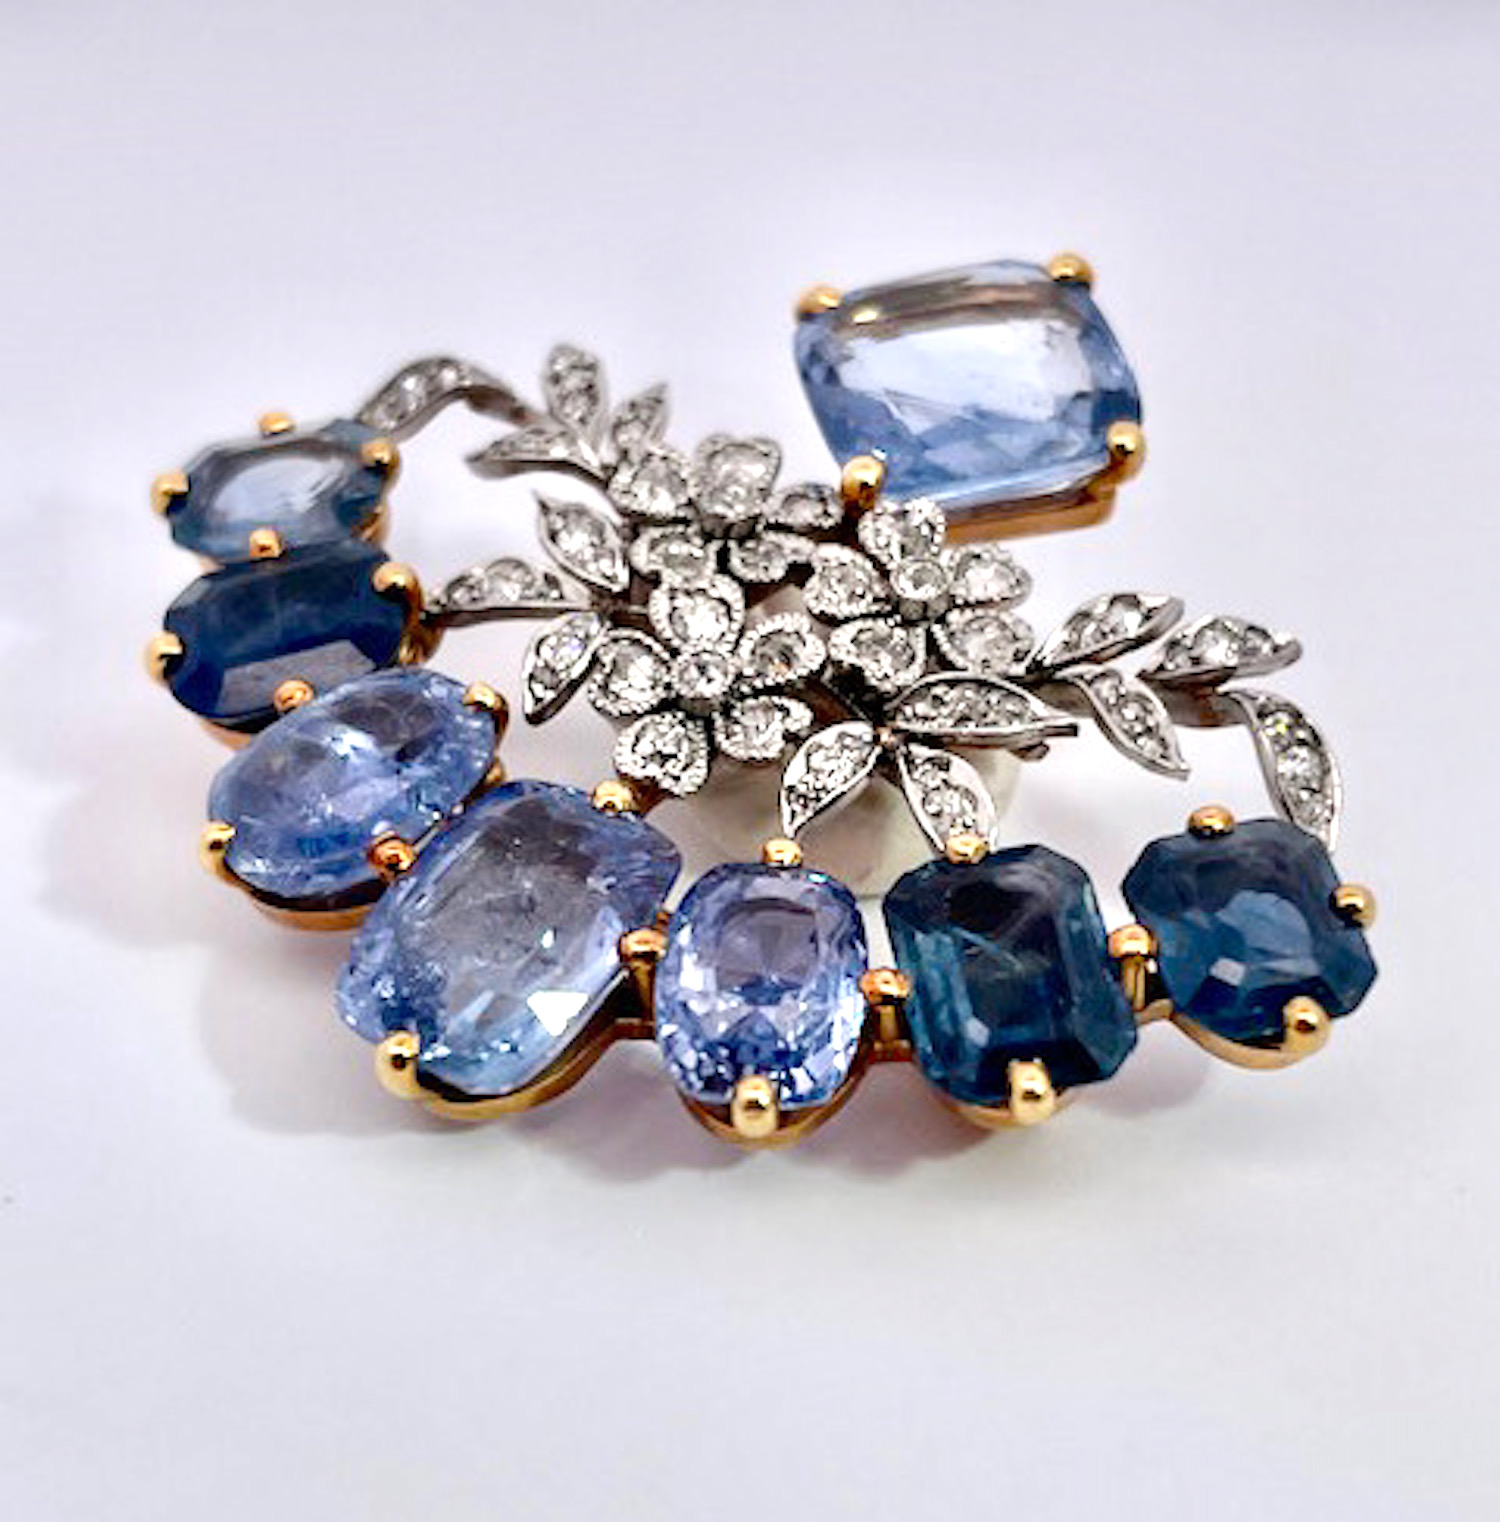 Heiheiup Diamond Fashion Hollow Brooch Ladies Jewelry Trend Gold Occident  Brooch Sweater Clips to Hold Sweater Together 